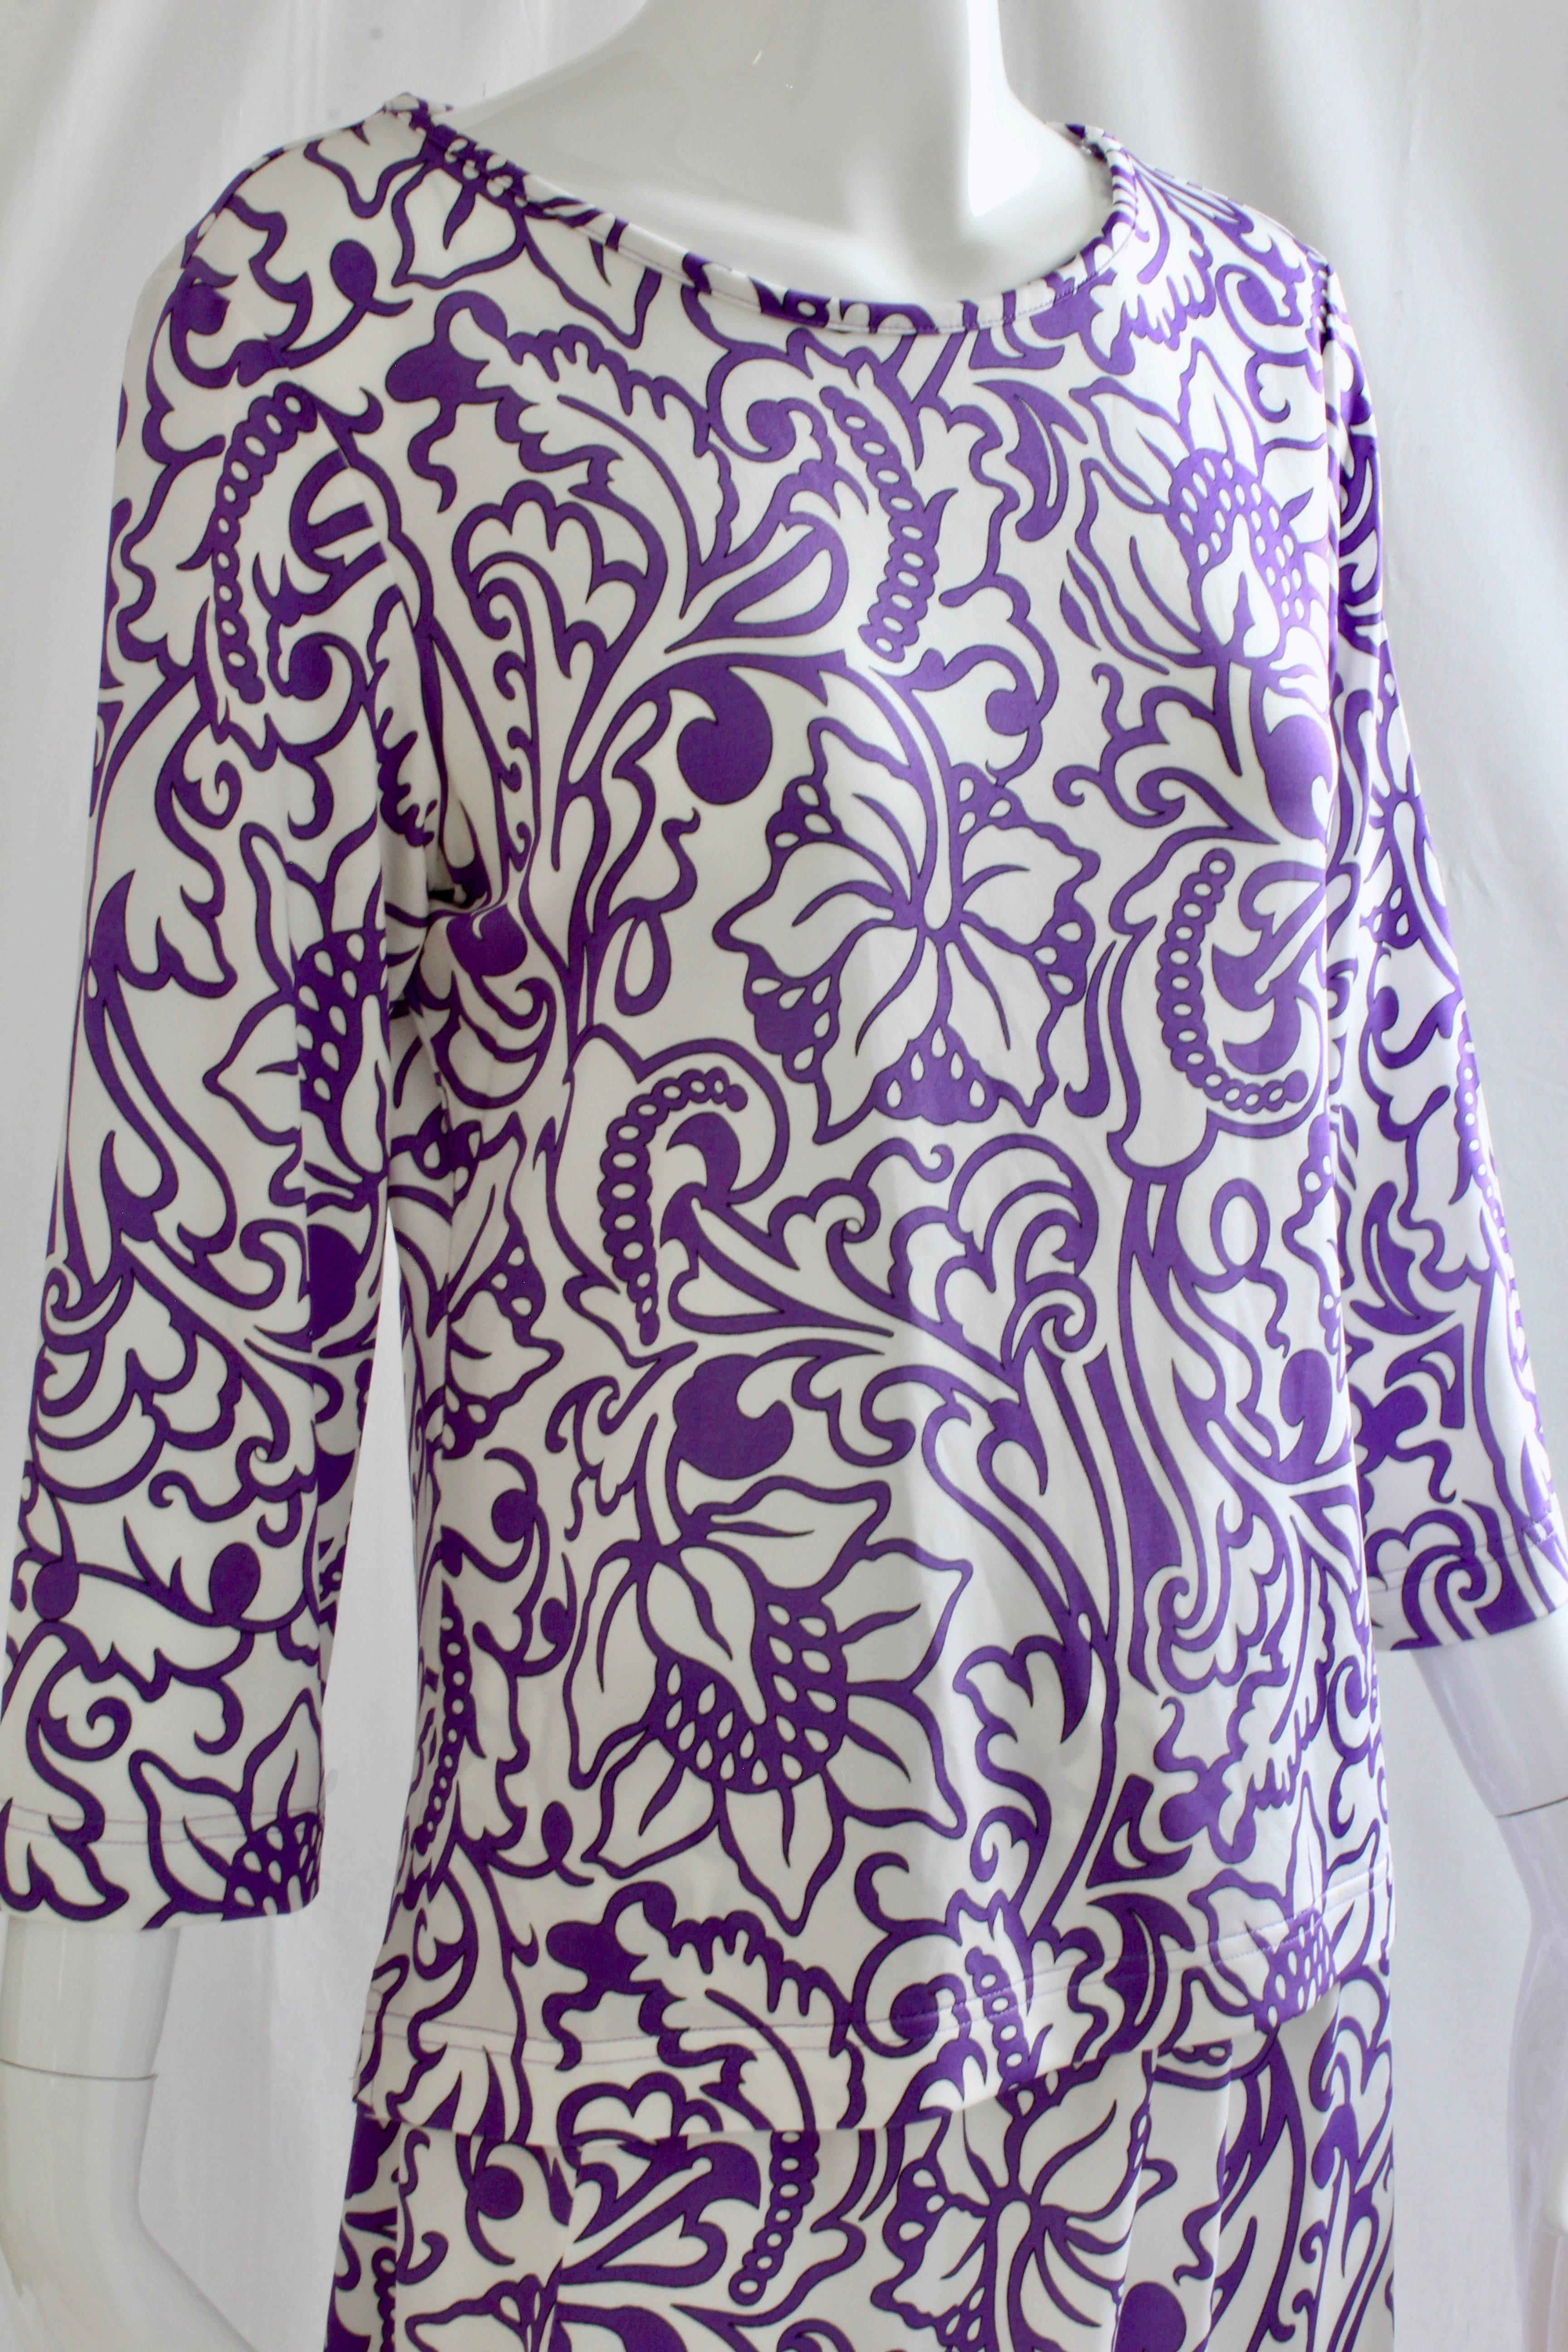 Averardo Bessi Blouse & Skirt Suit 2pc Purple White Floral Abstract Italy 12/10 1